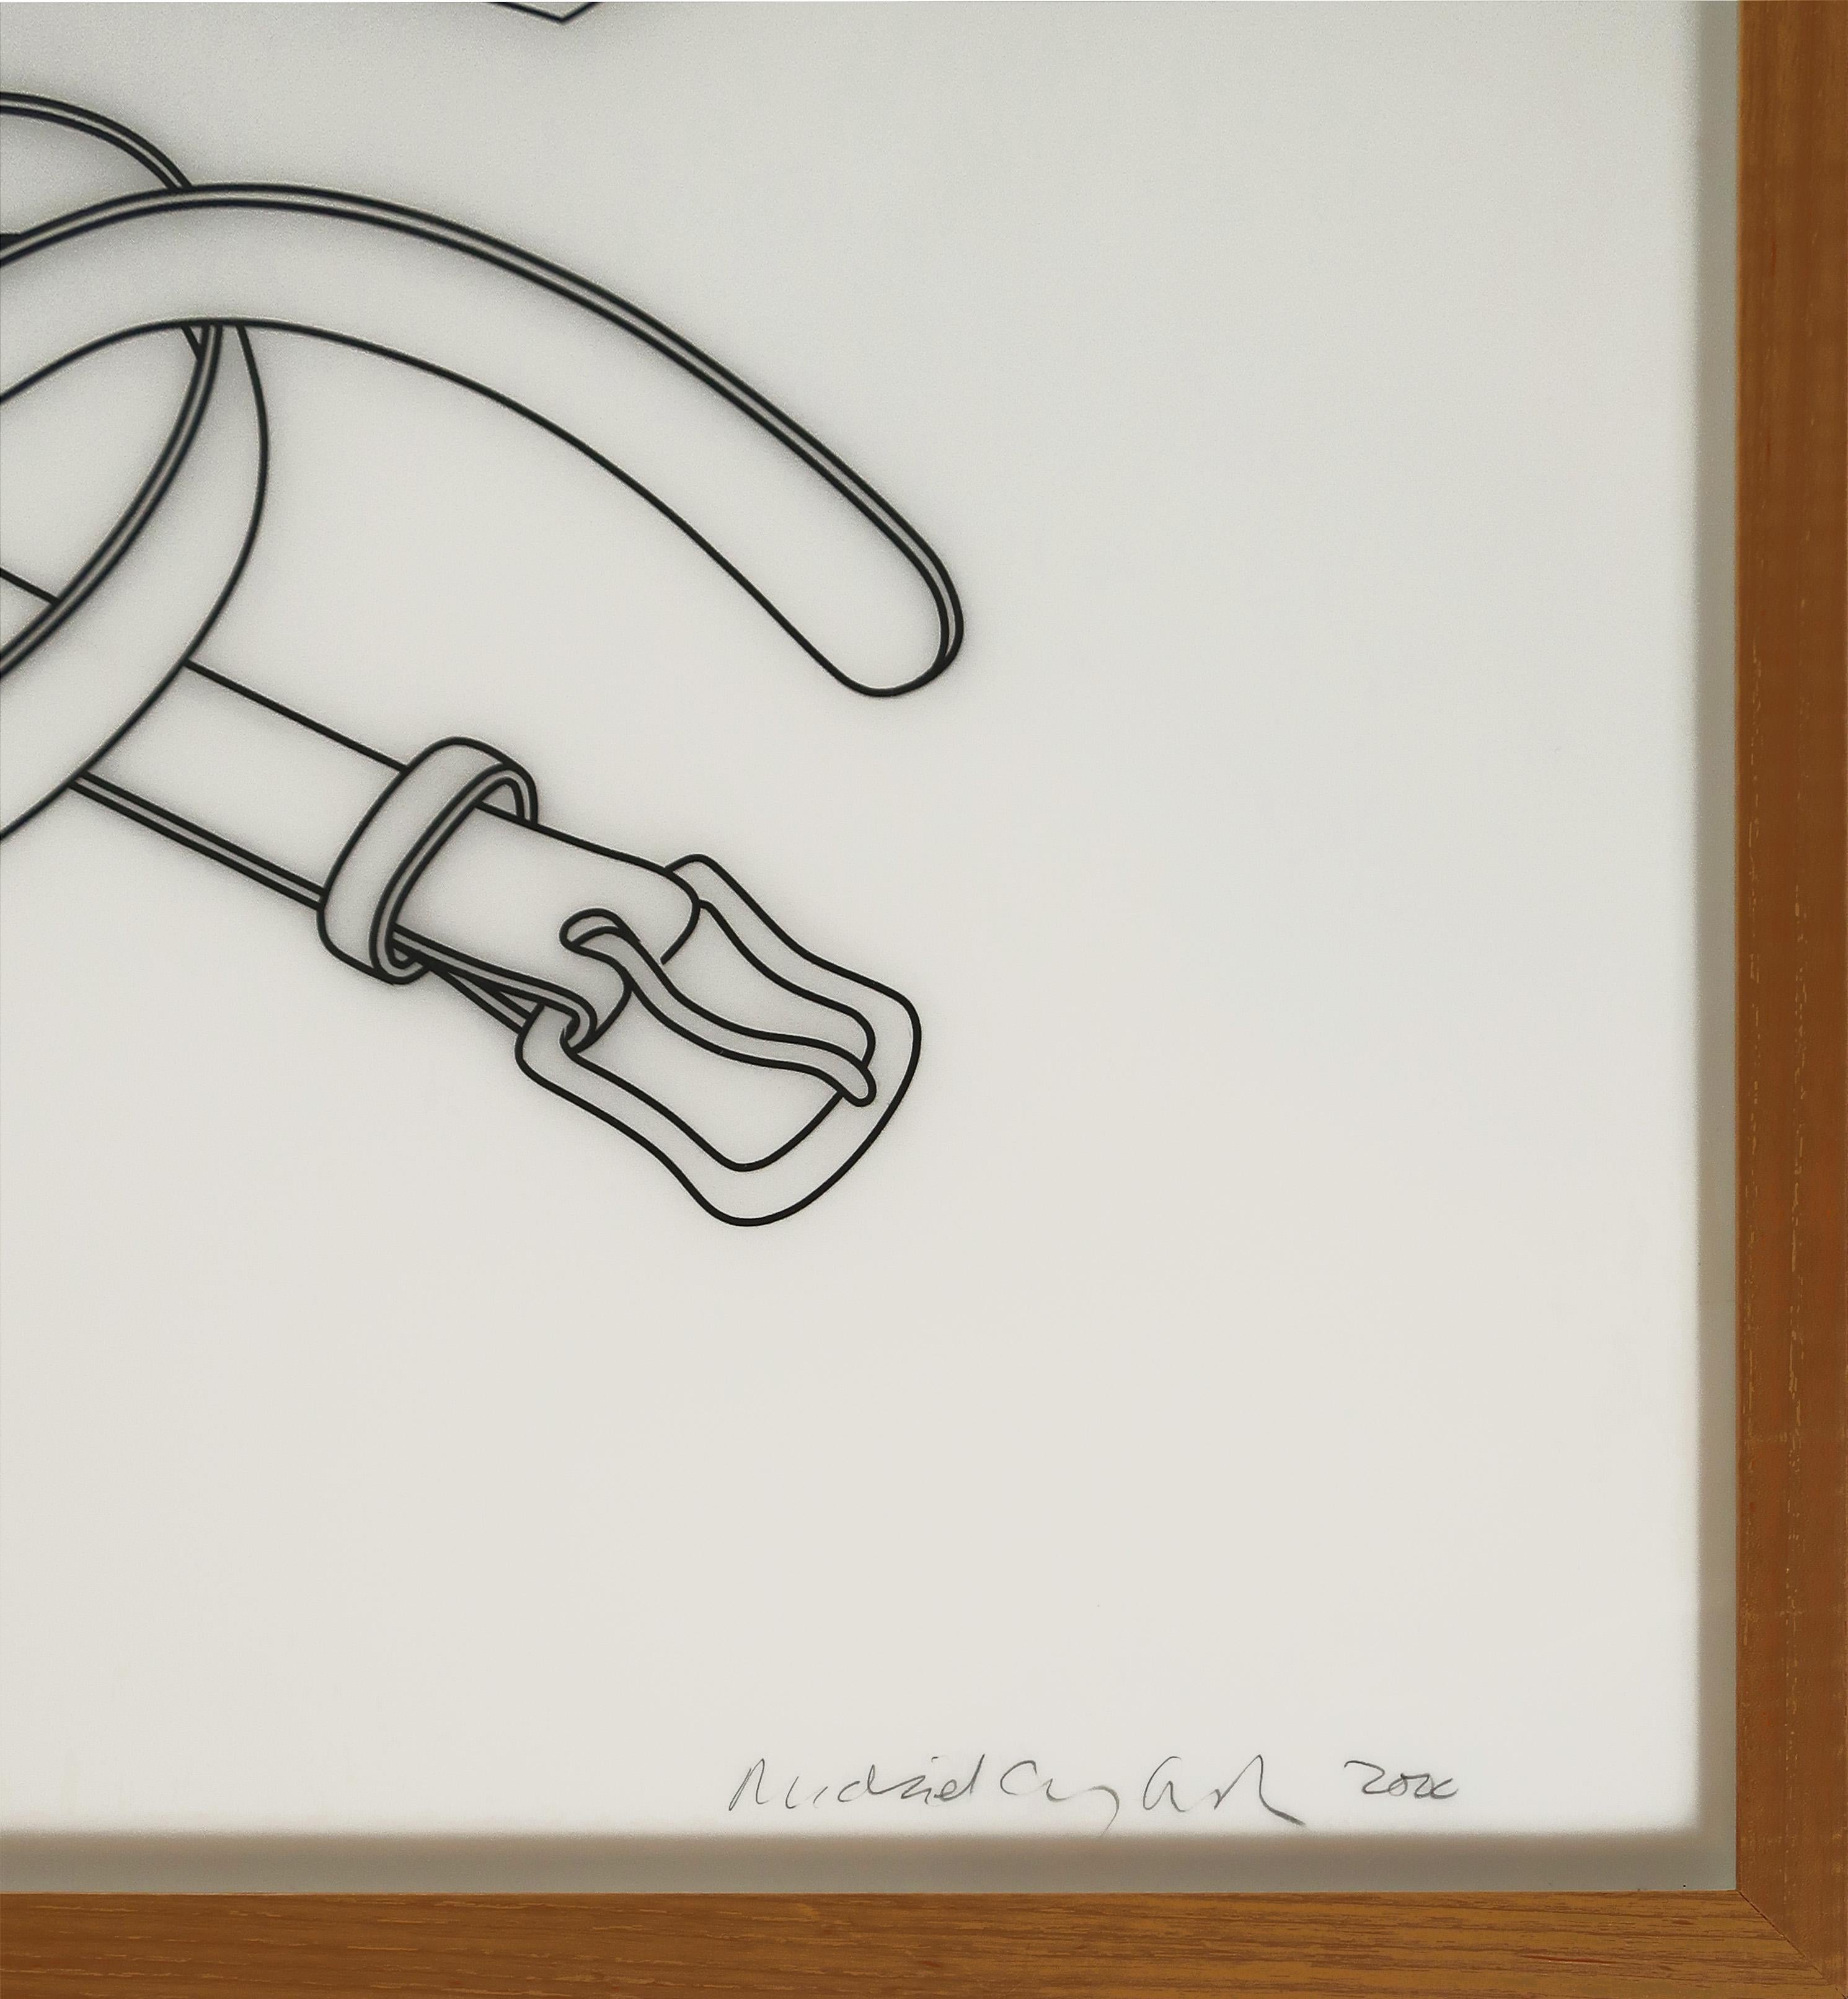 Michael Craig-Martin
Untitled (after ‘Las Meninas’), 2000
Tape on acetate
37 x 32 1/2 inches (sheet)
37 1/2 x 33 1/8 x 1 1/2 inches (frame)
Signed recto